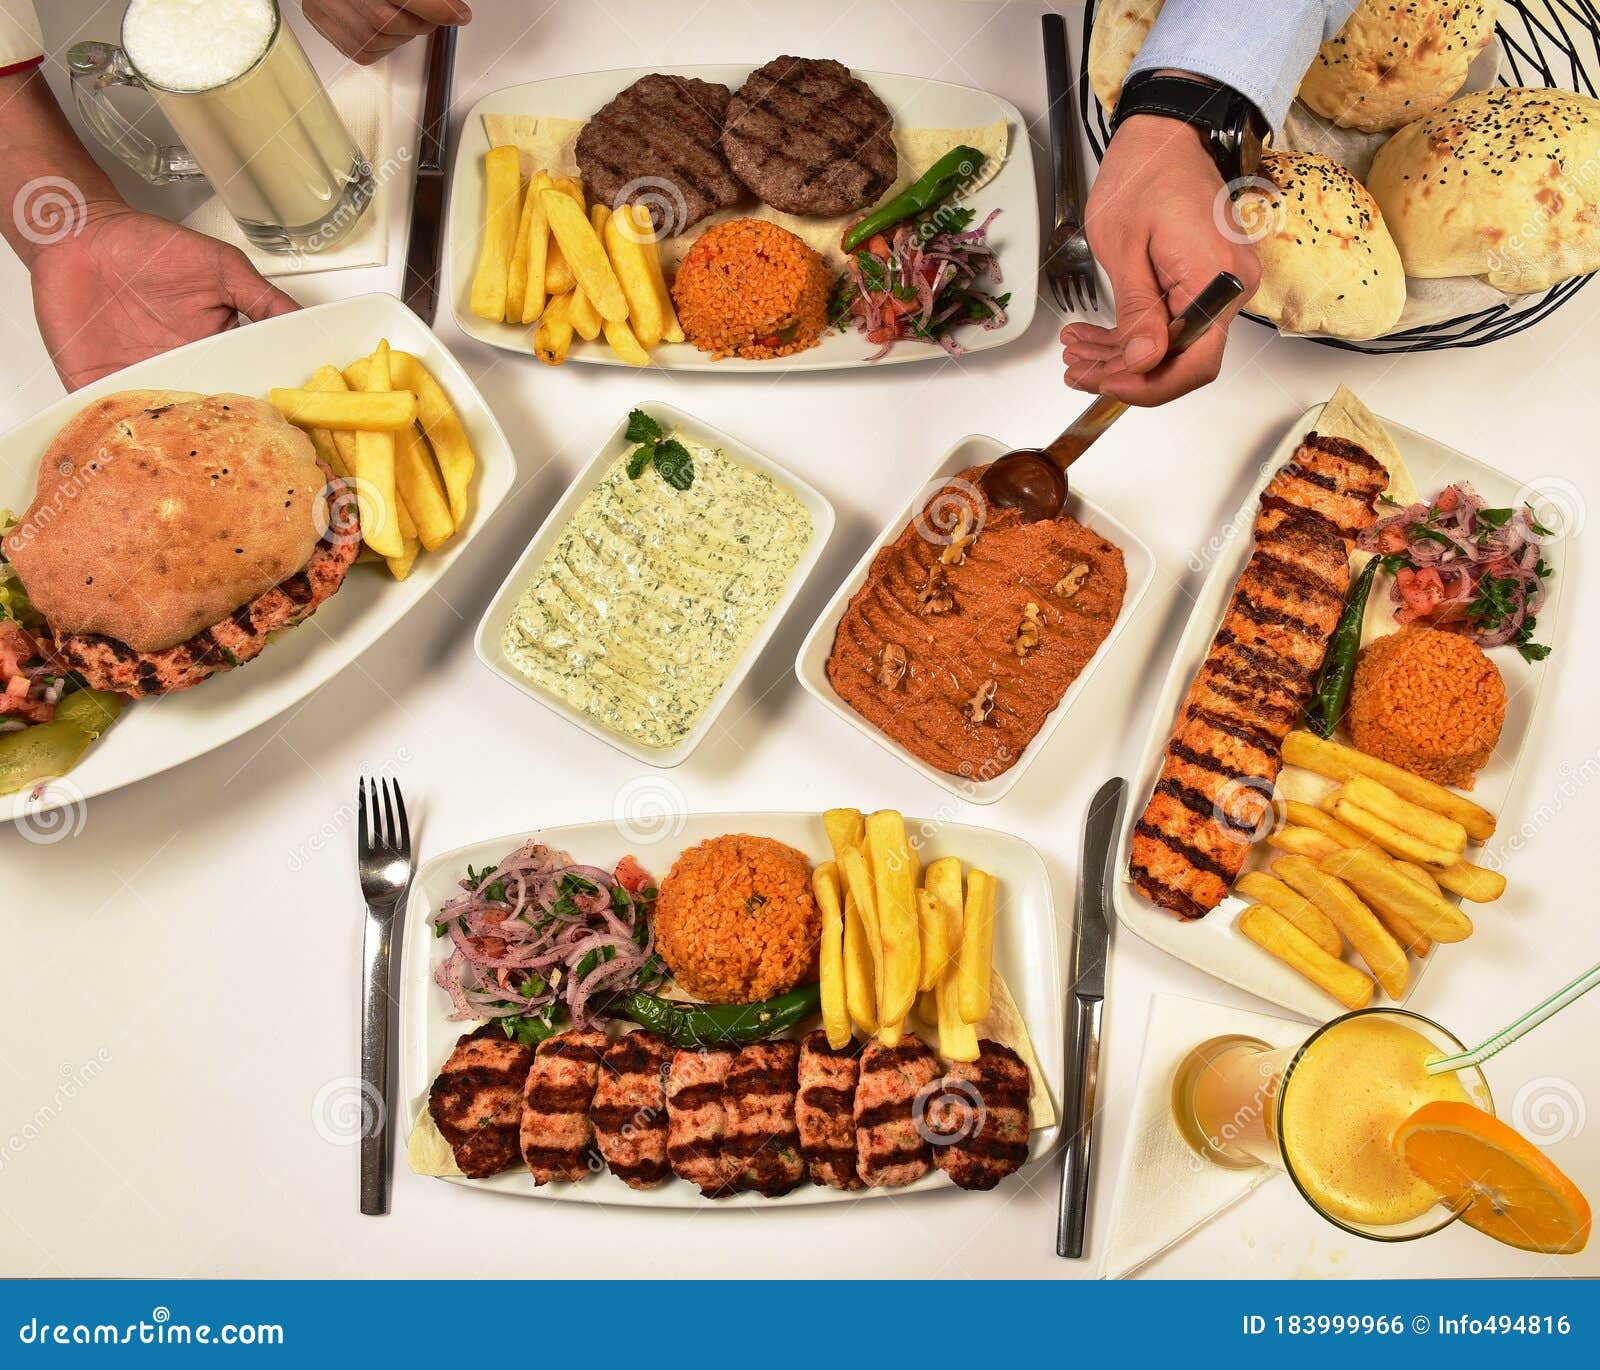 Healthy and Nutritious Turkish and Arabic Food in Dubai Stock Photo